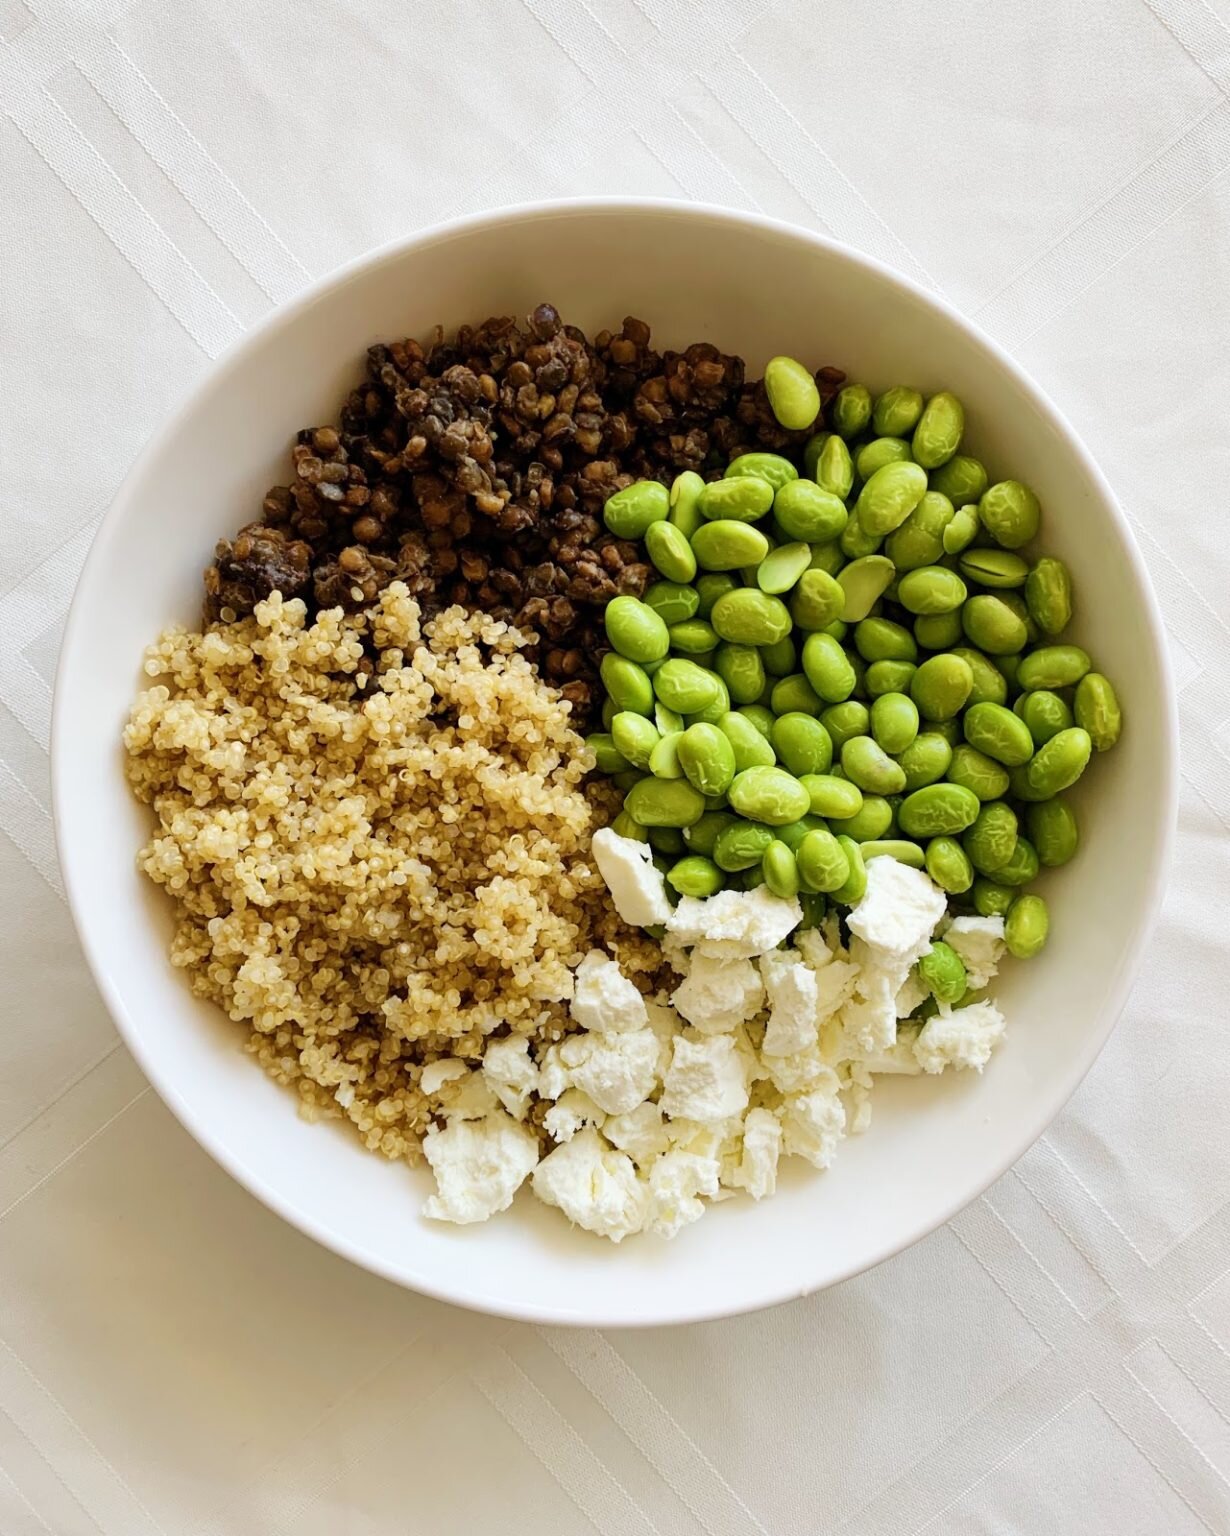 6 Easy Vegetarian Meals To Try